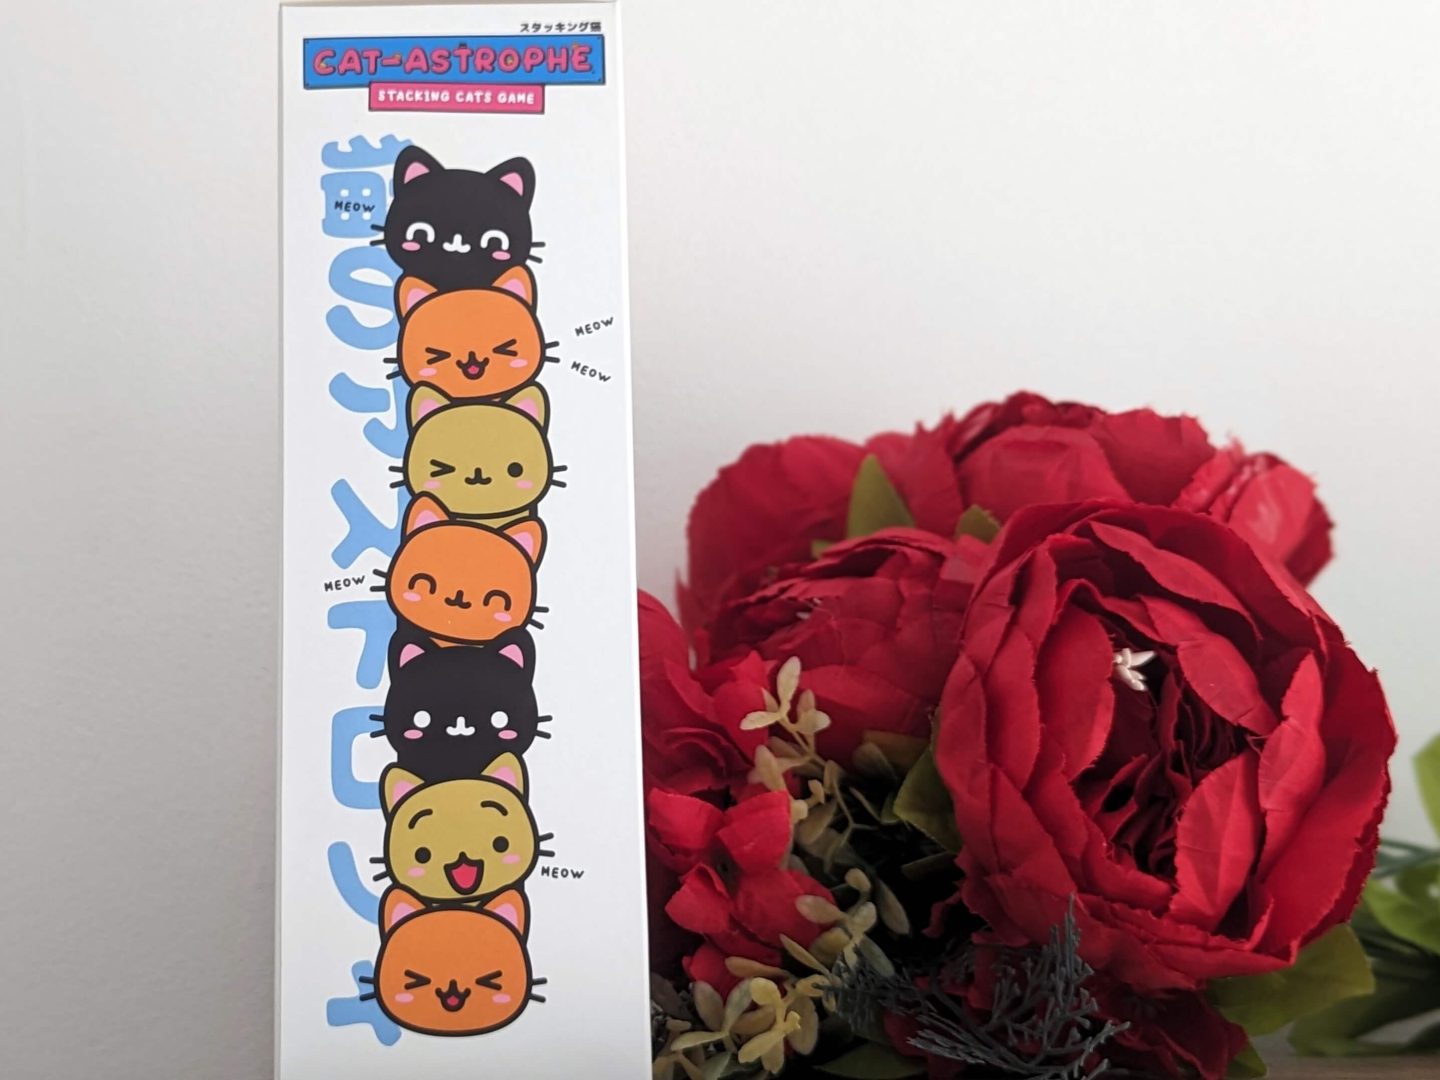 Catastrophe tower game displayed next to red bunch of flowers in front of a white wall